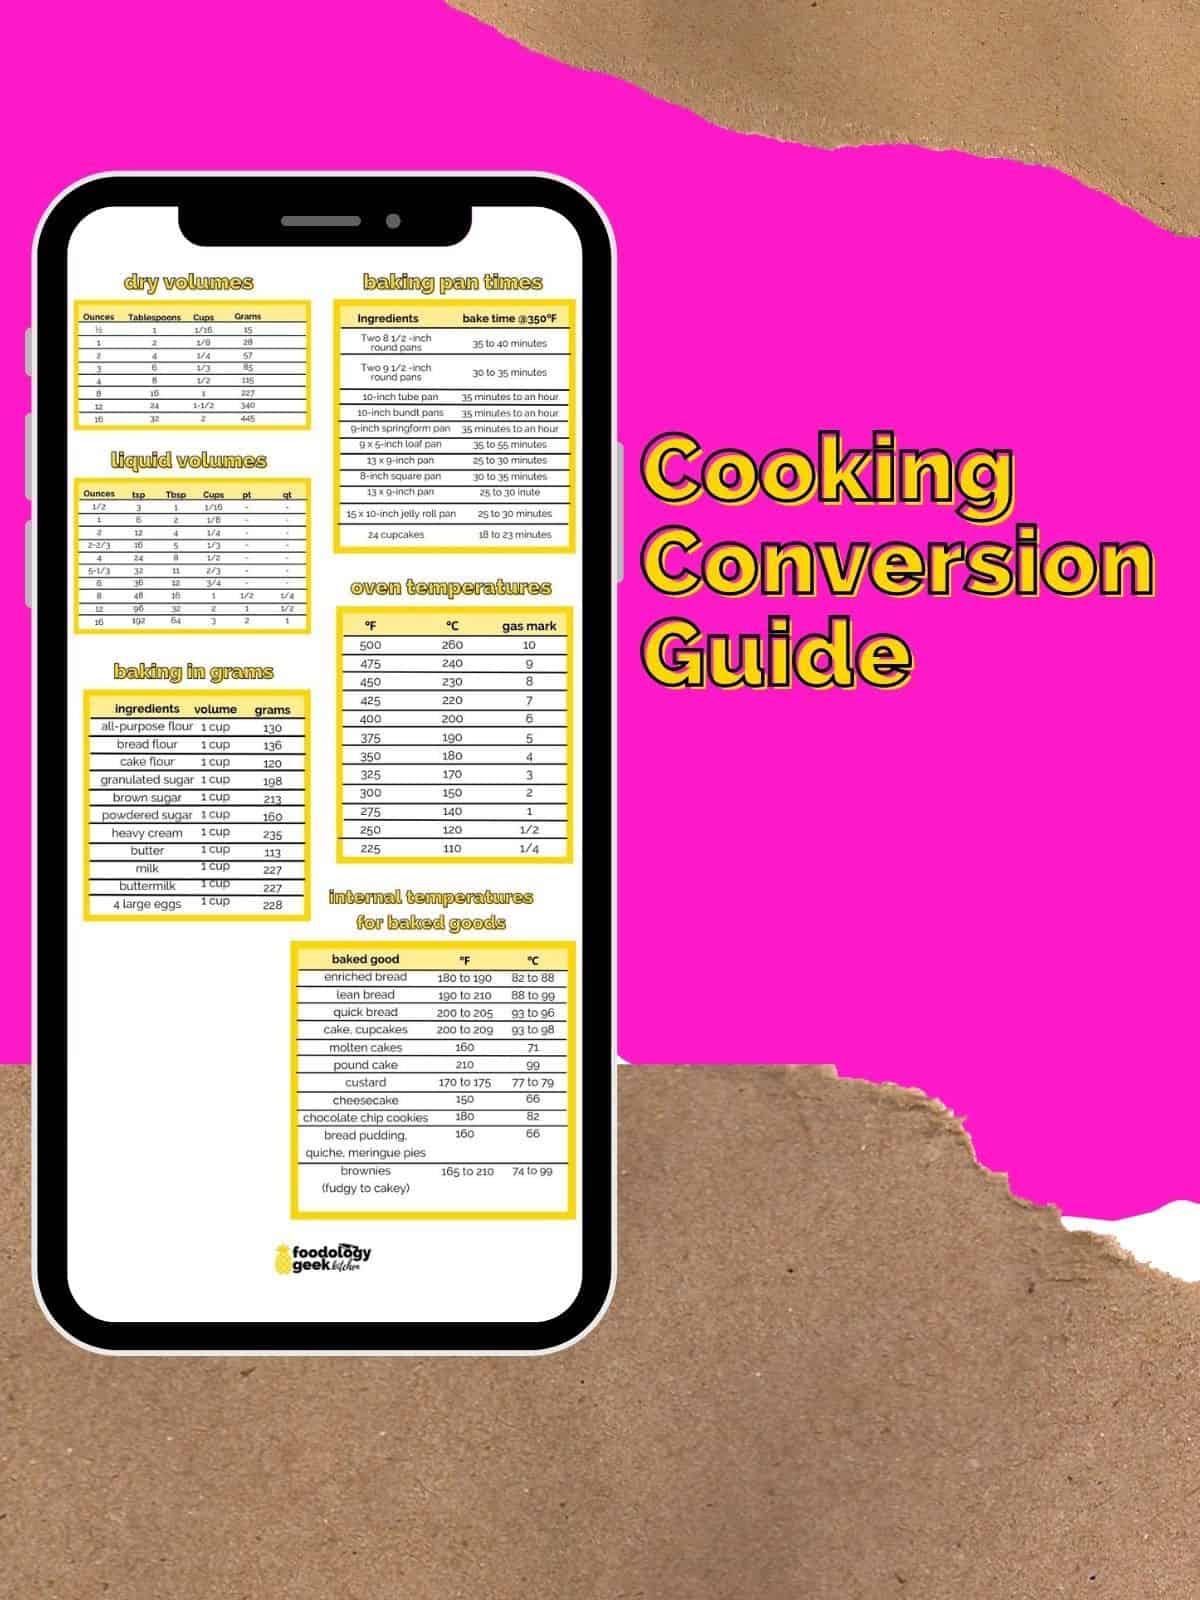 I phone displaying the cooking conversion chart download